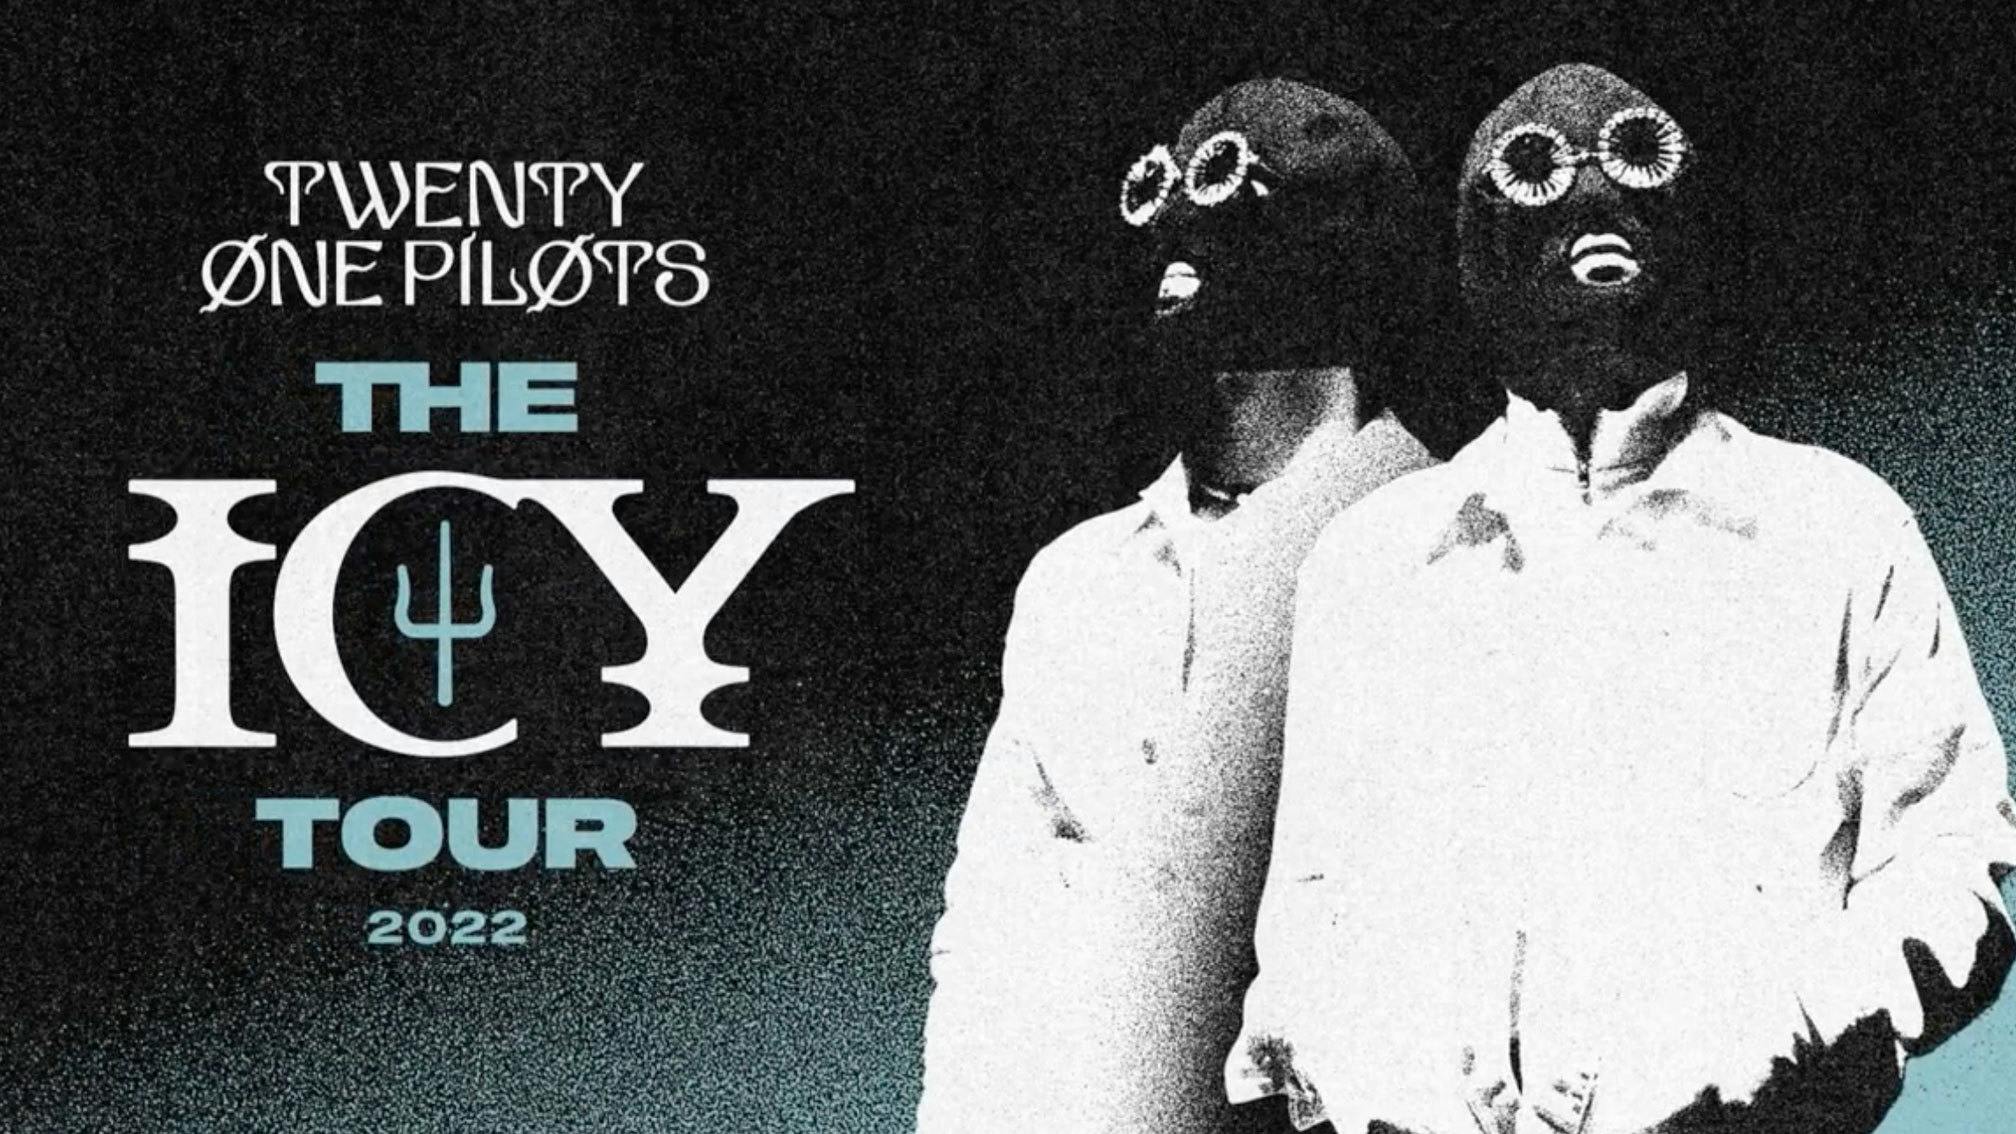 twenty one pilots announce The Icy Tour 2022